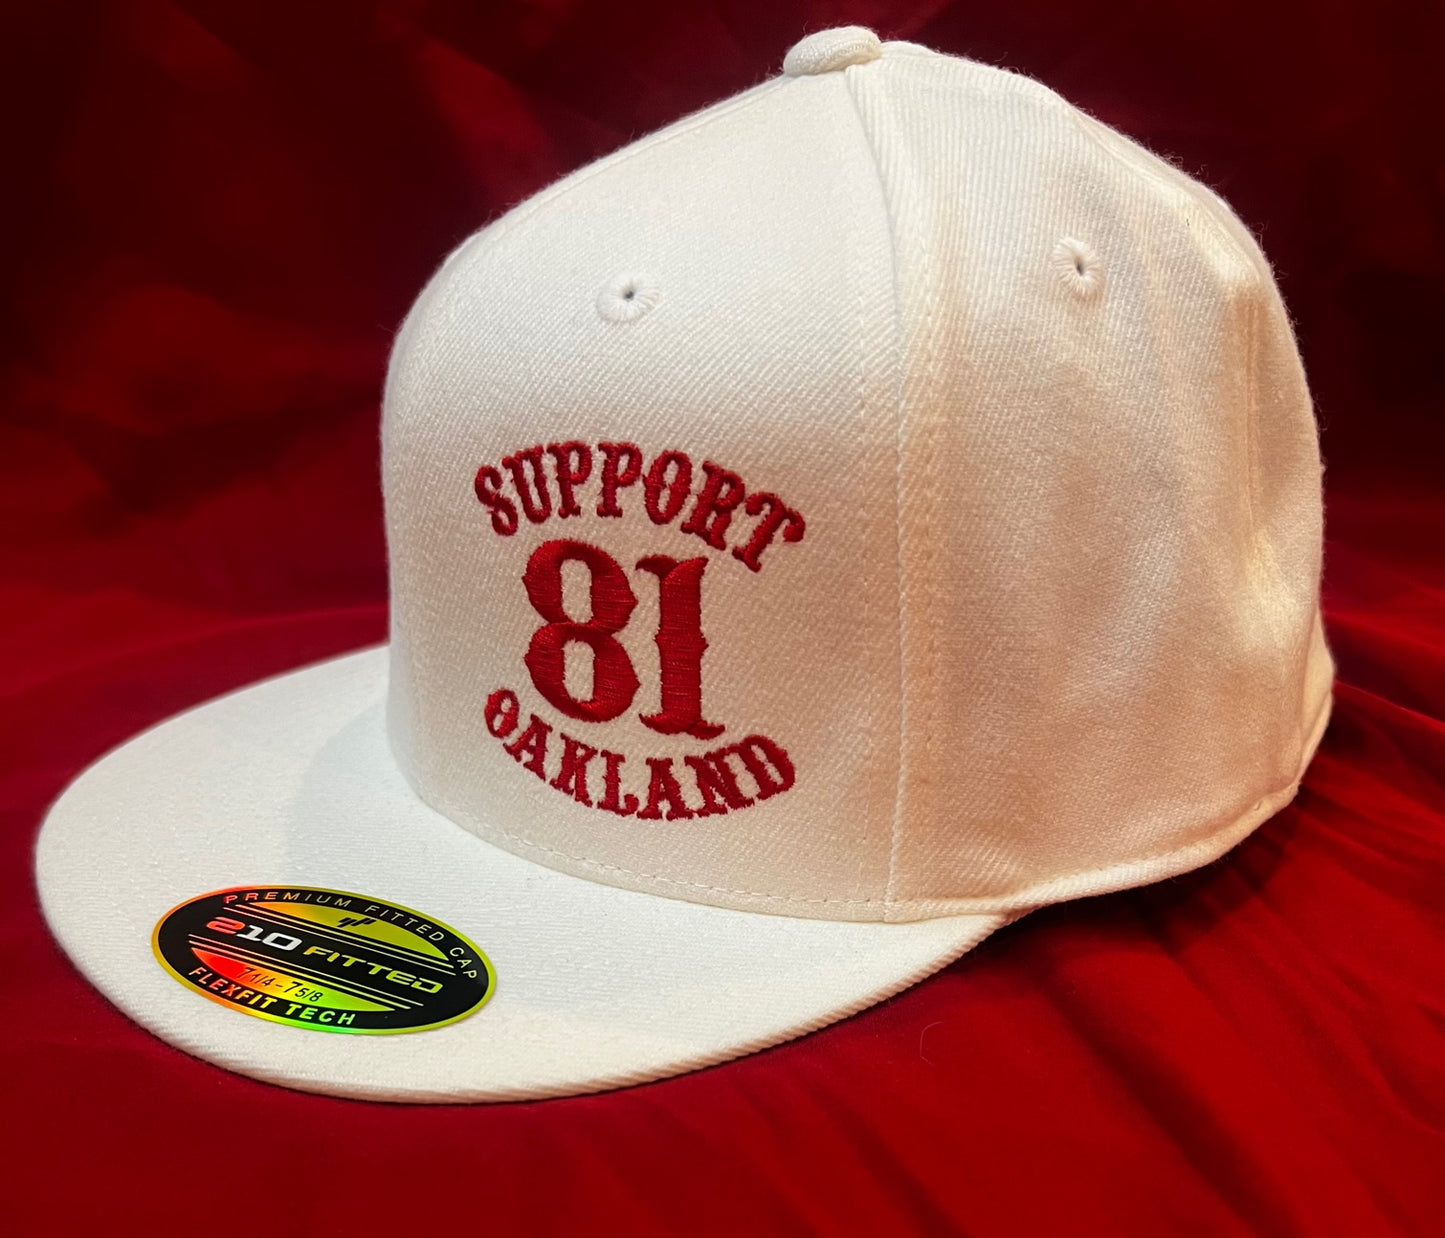 2 COLORS AVAILABLE- SUPPORT 81 OAKLAND HAT